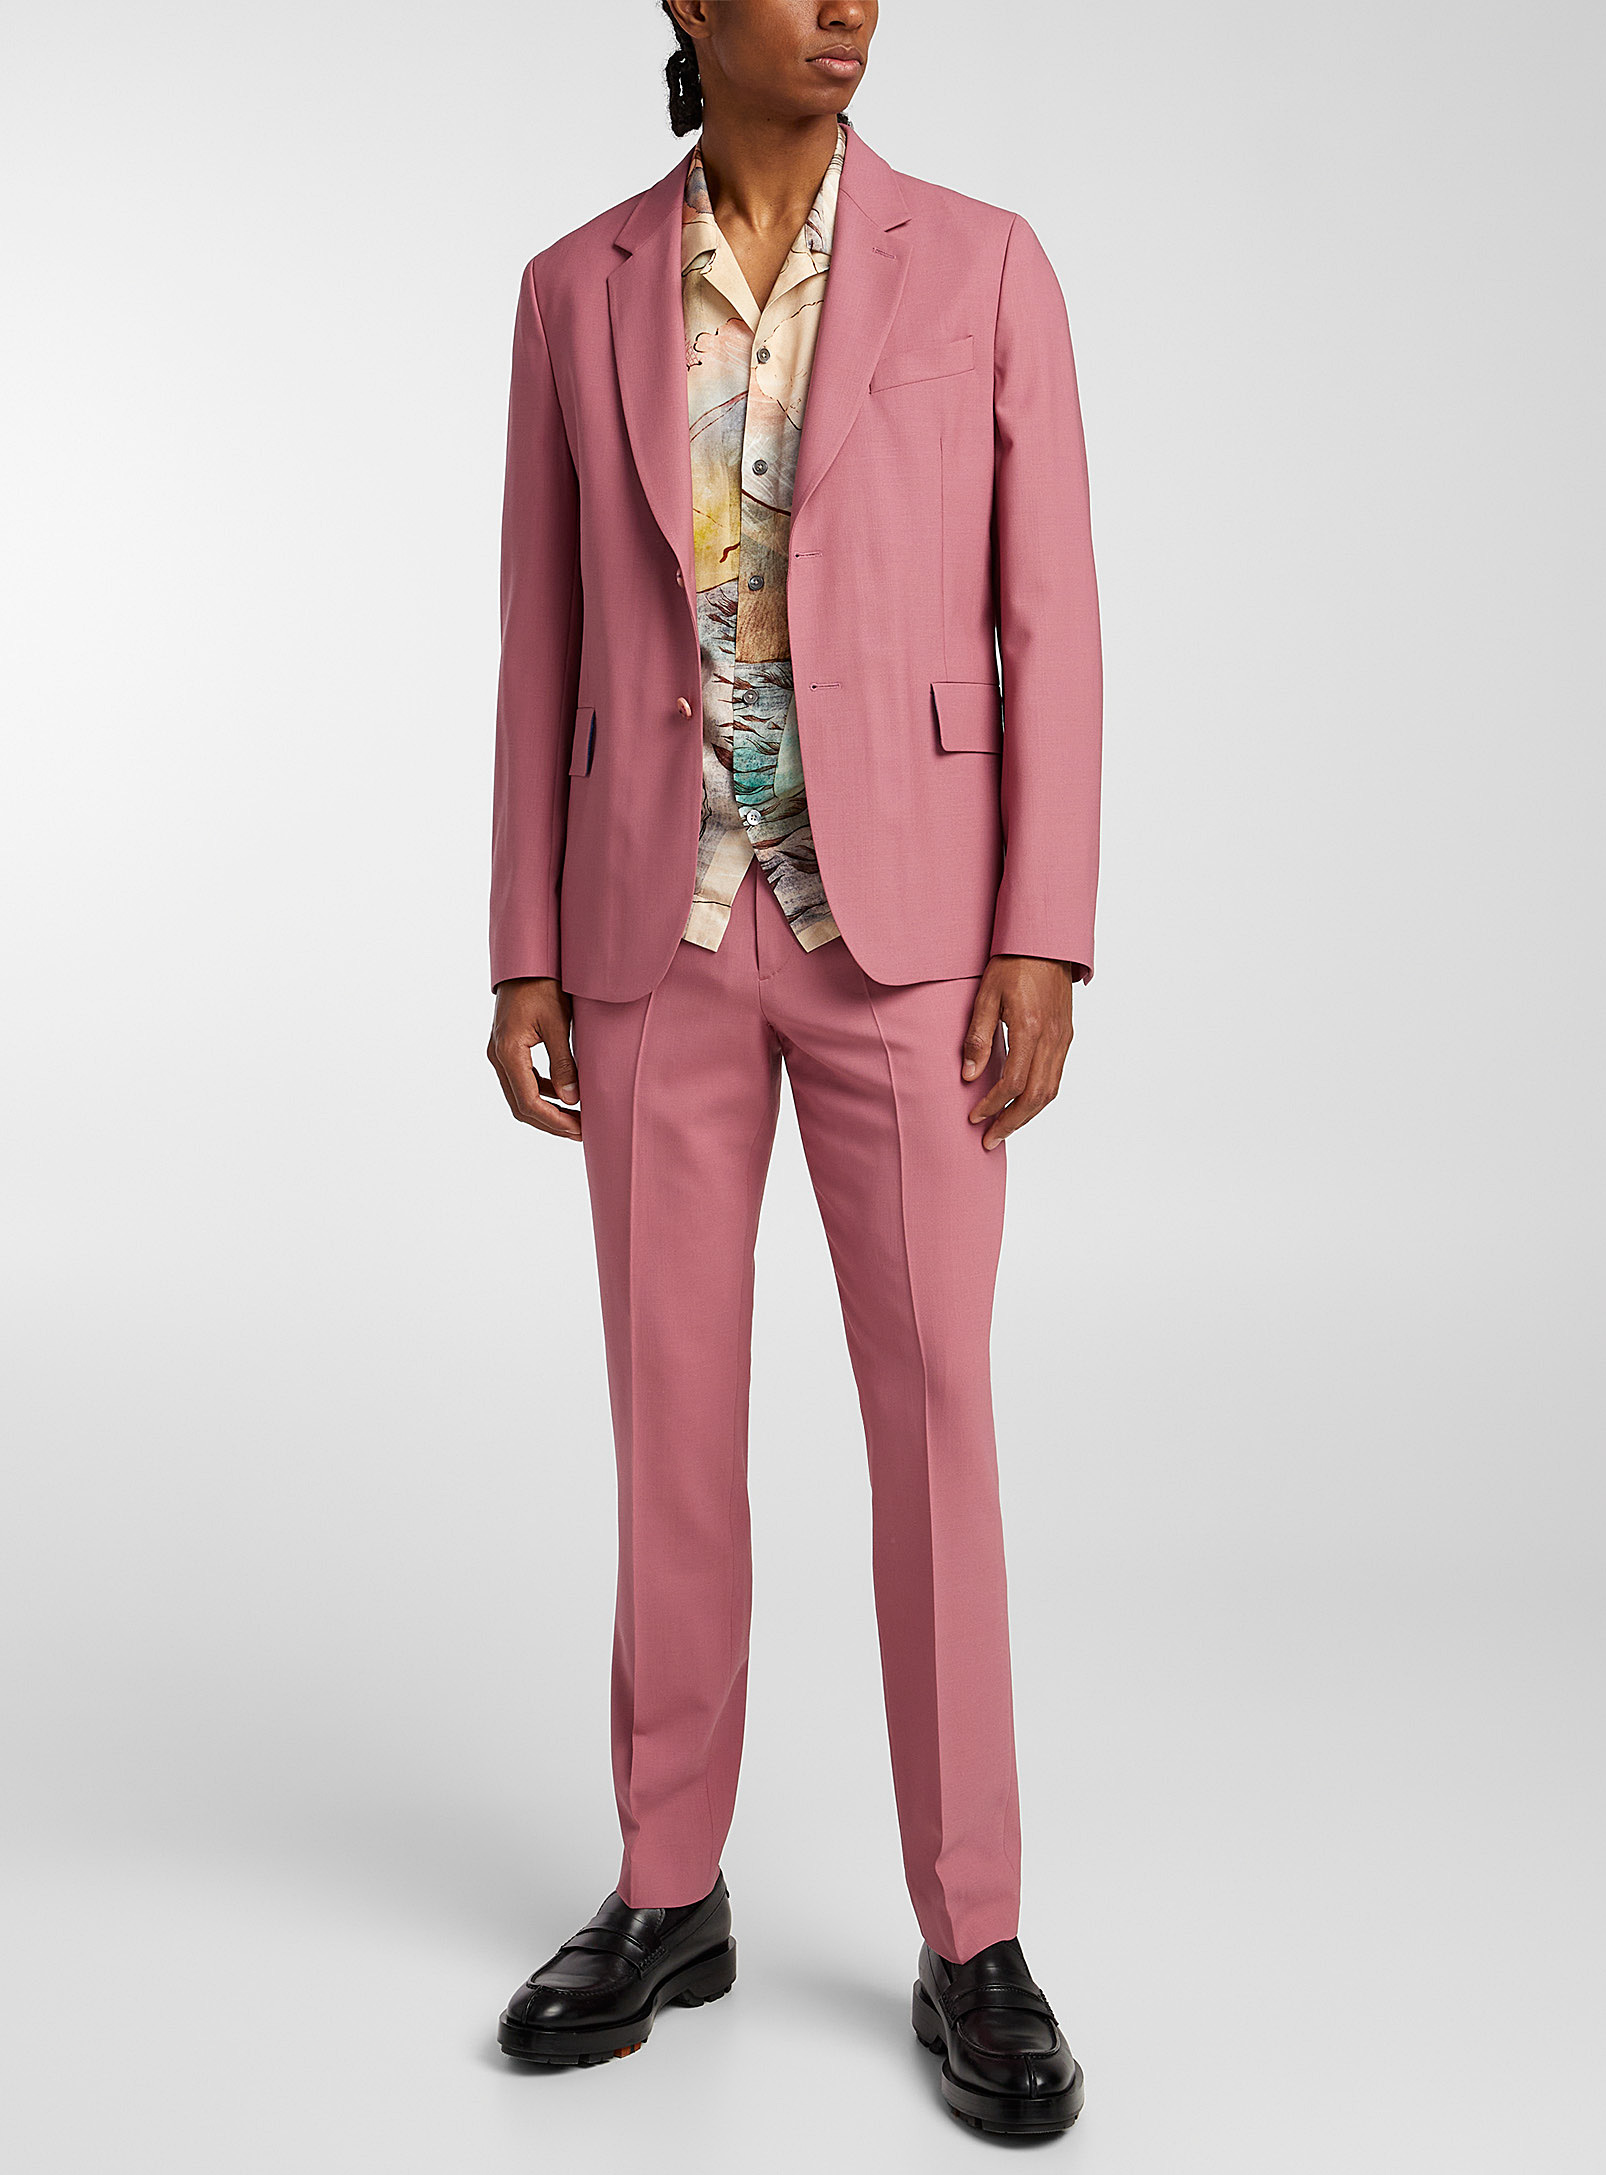 Paul Smith - Men's Pure wool pink pant